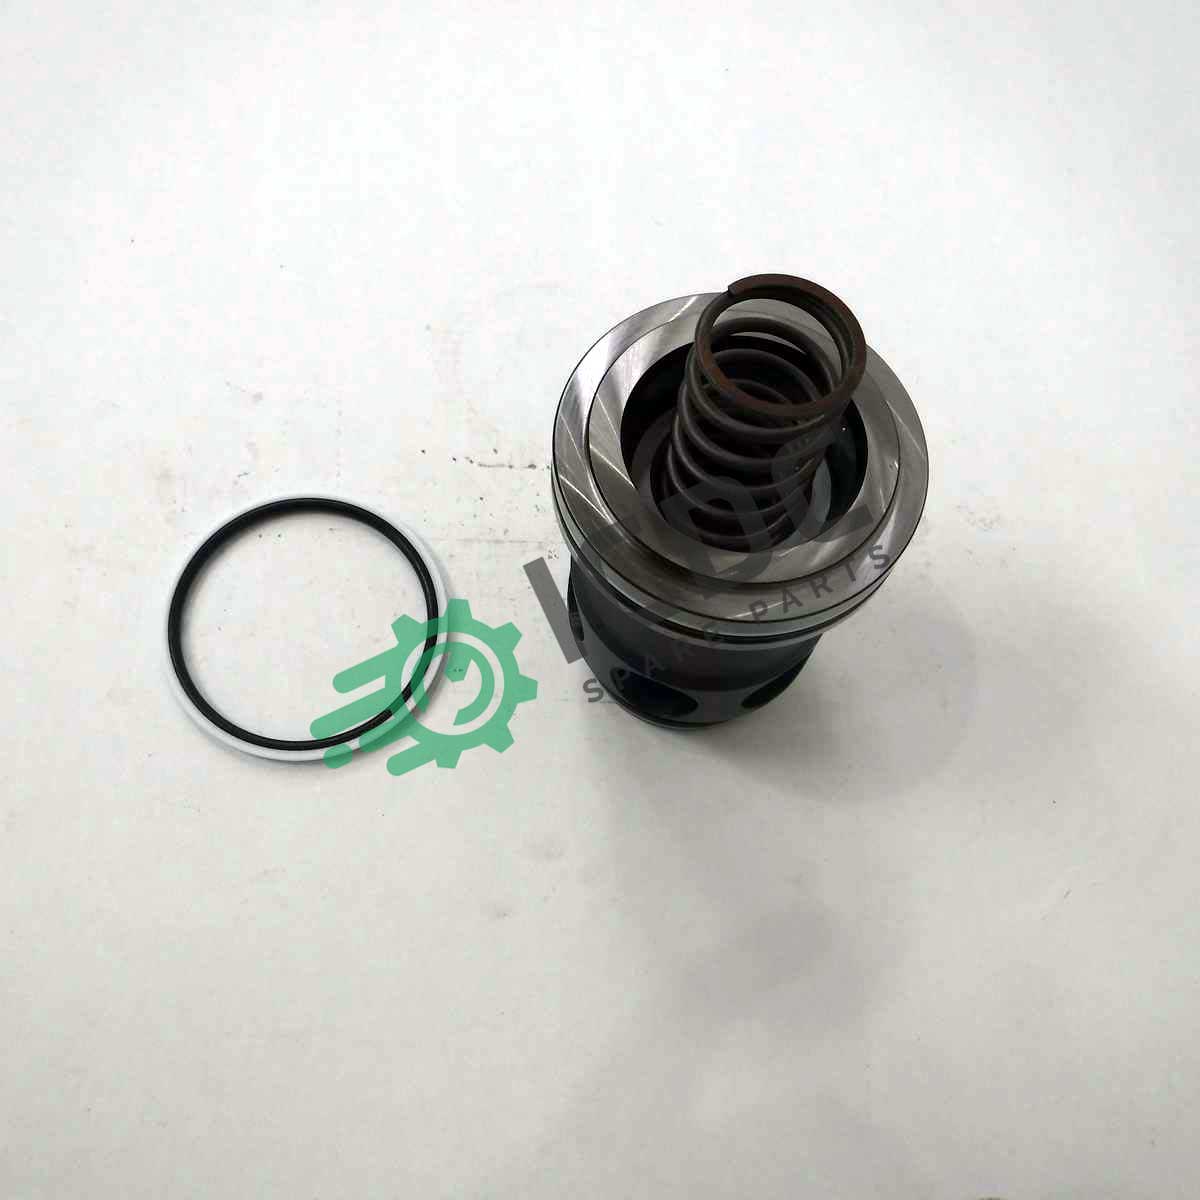 Rexroth 572-740-000-2 Valve Repair Kit MISSING O-RING SEALS ! NEW ! -  Industrial Automation Canada